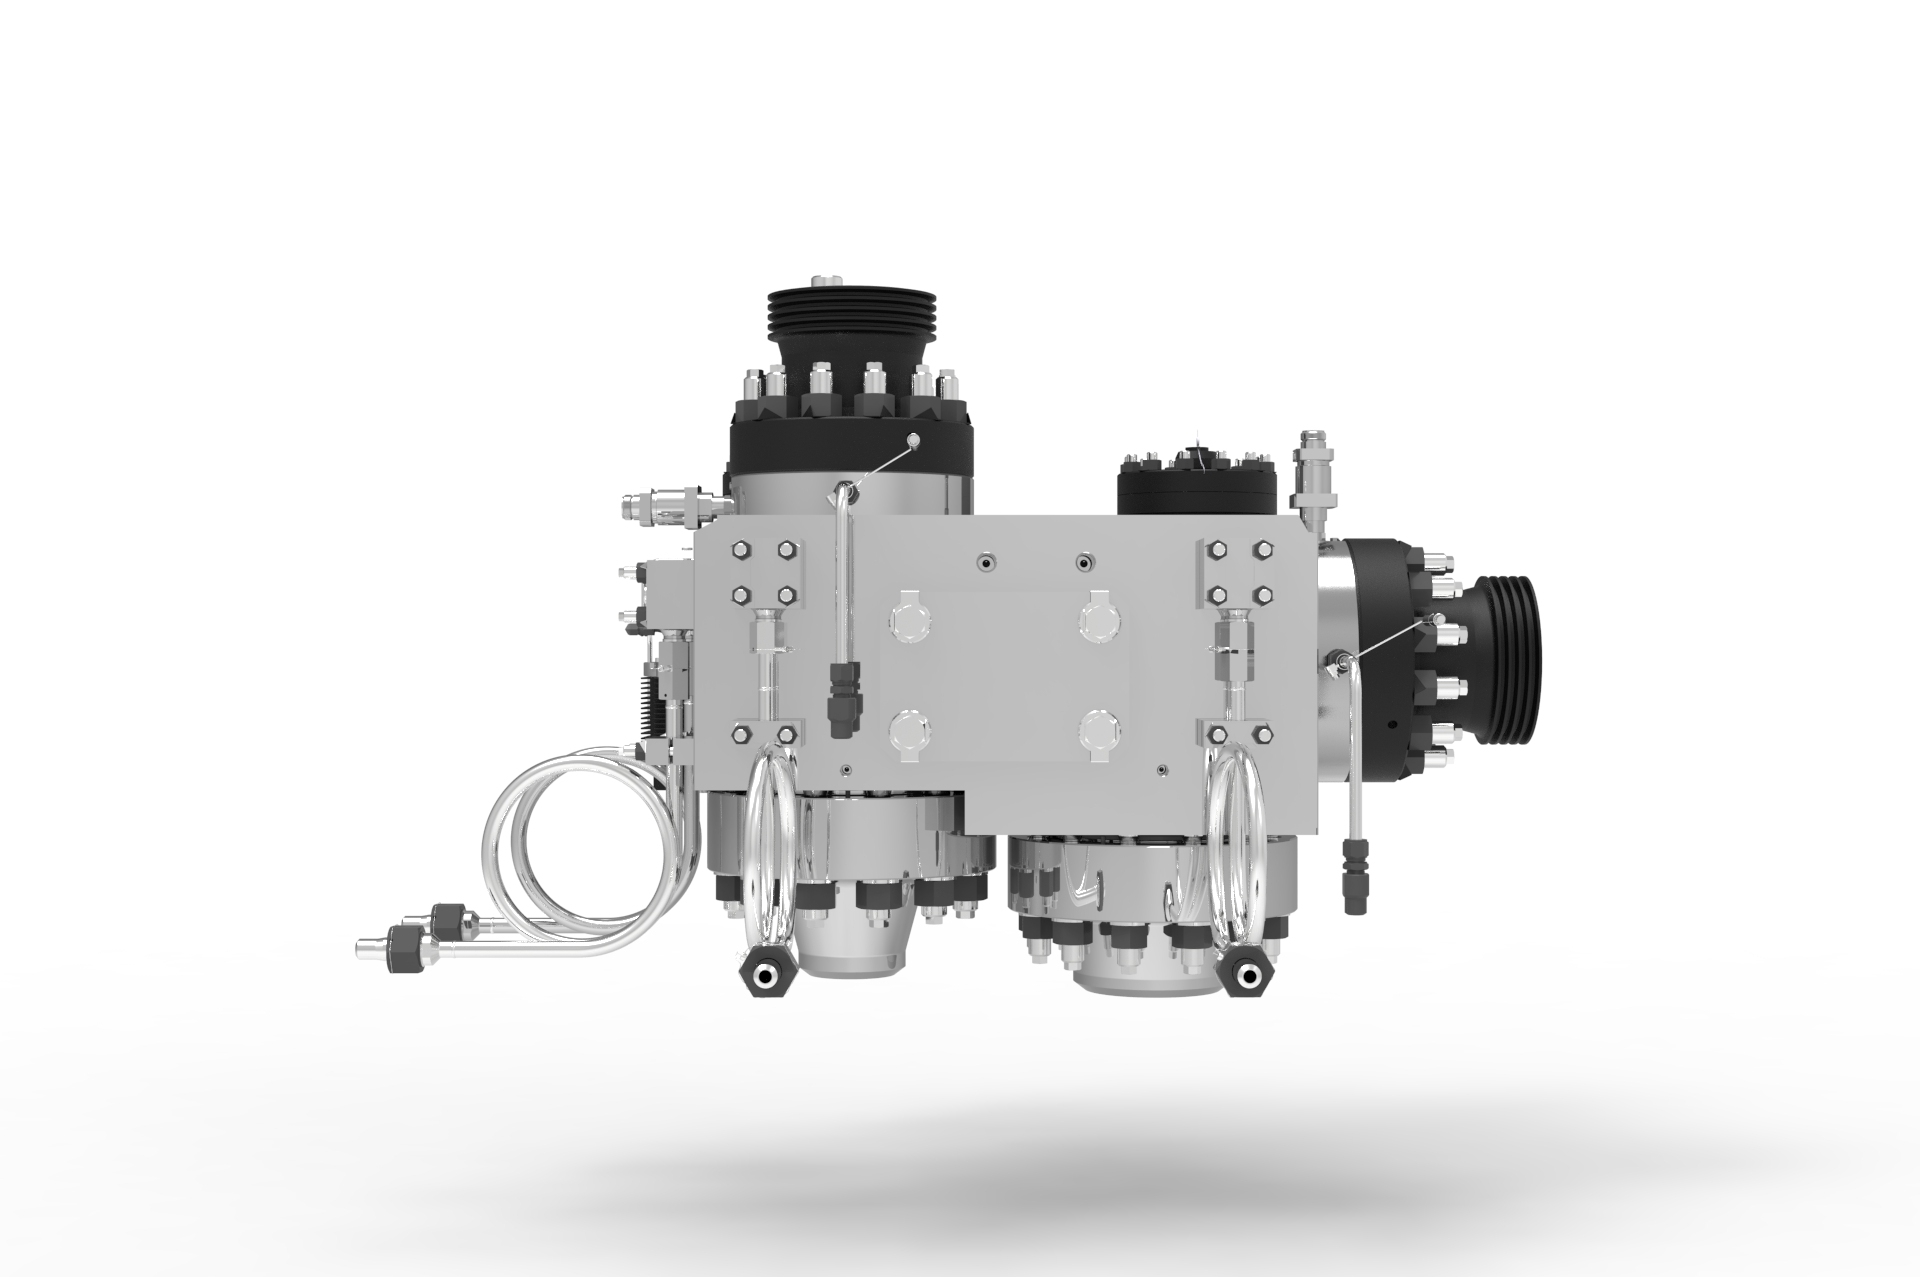 Backside view of a SEBIM CTSV 3000 Compact Tandem Safety Valves manufactured by Trillium Flow Technologies